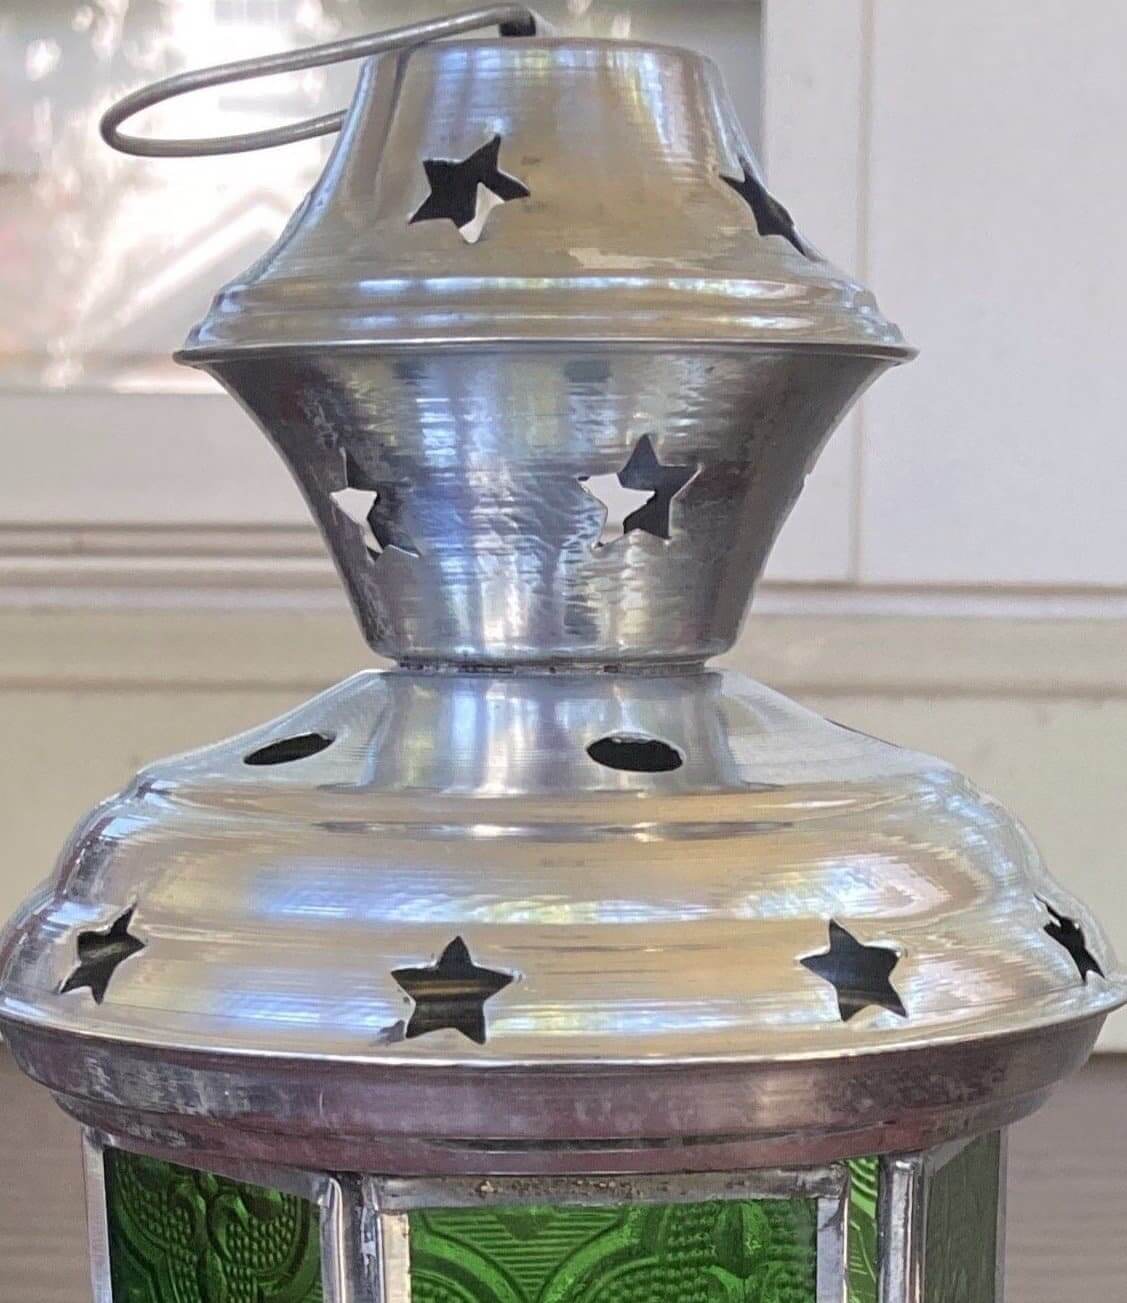 Green Glass and Silver with Stars Lantern- The House of Awareness